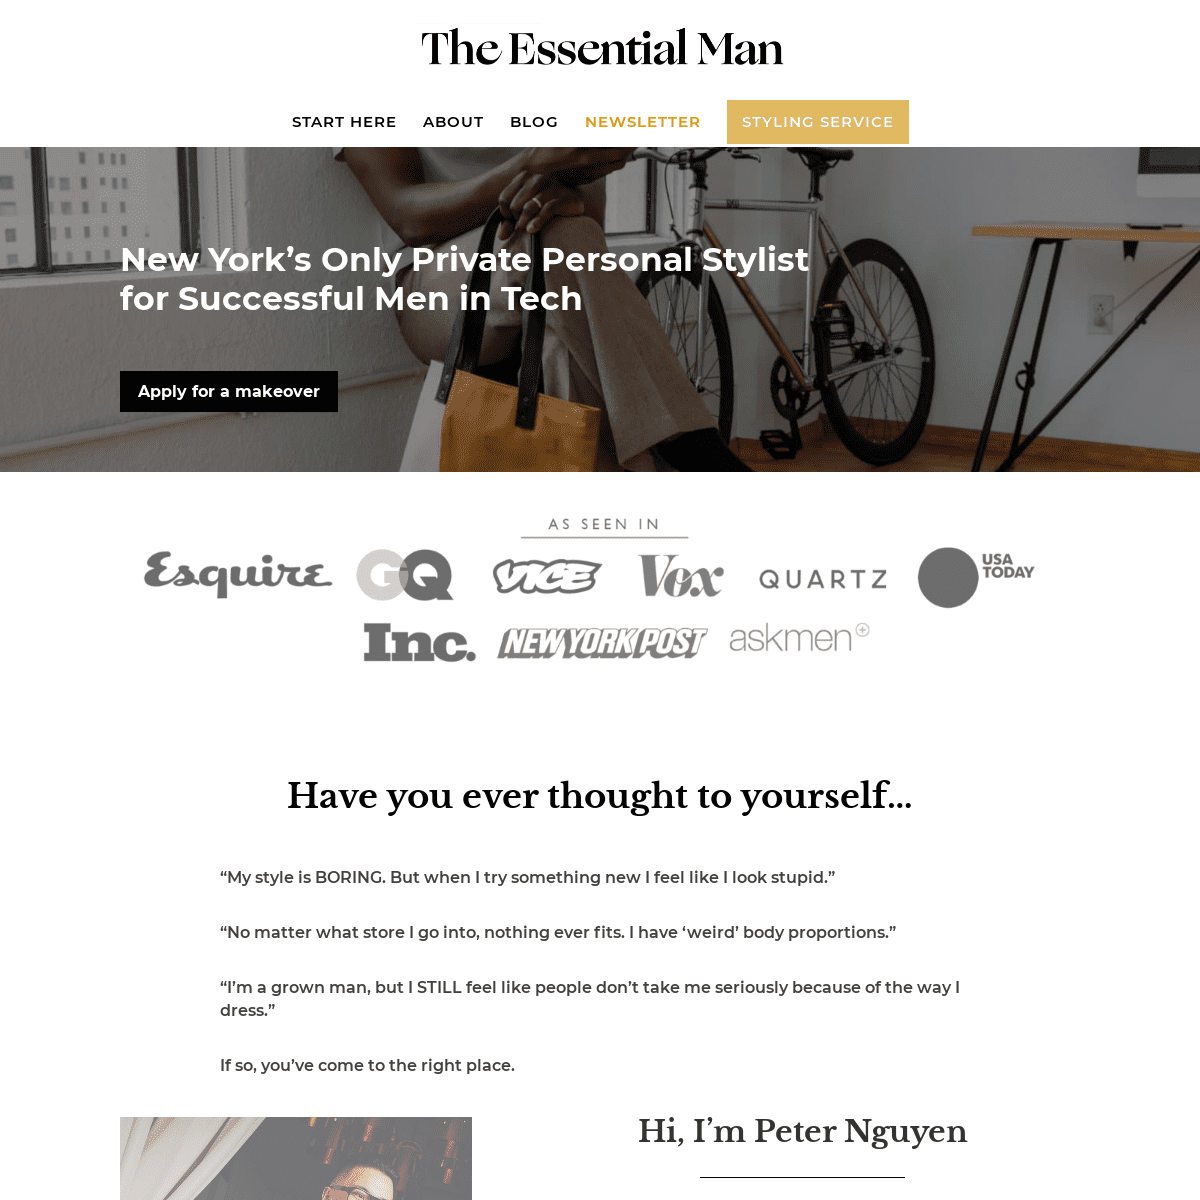 A complete backup of https://theessentialman.com